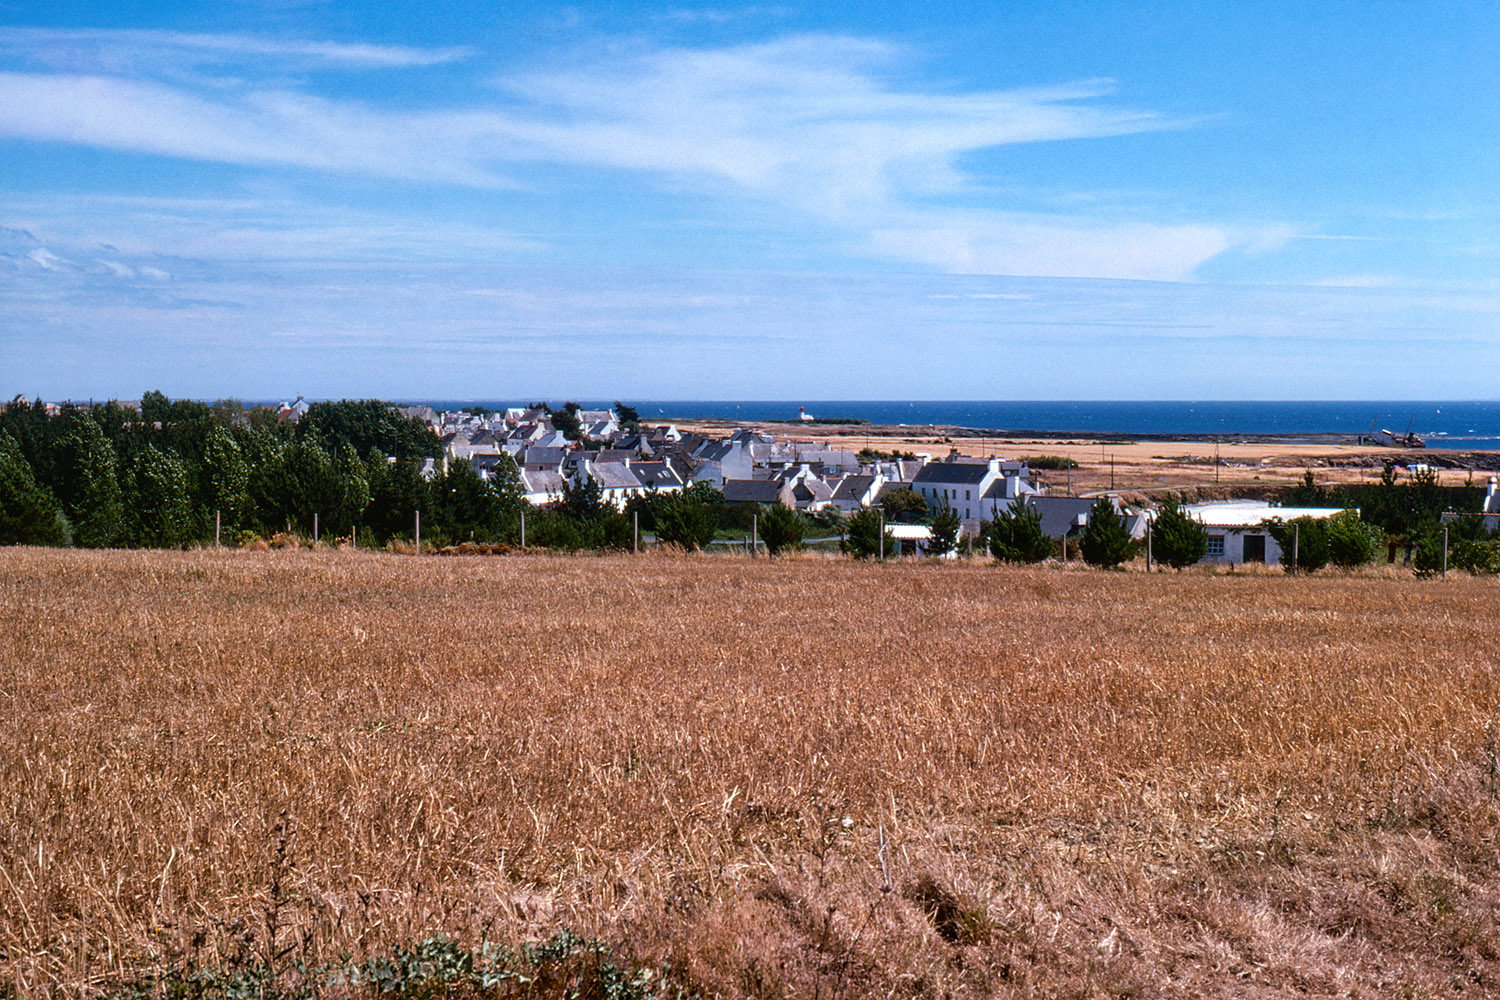 Looking towards the 'Pointe des Chats' lighthouse in the far distance